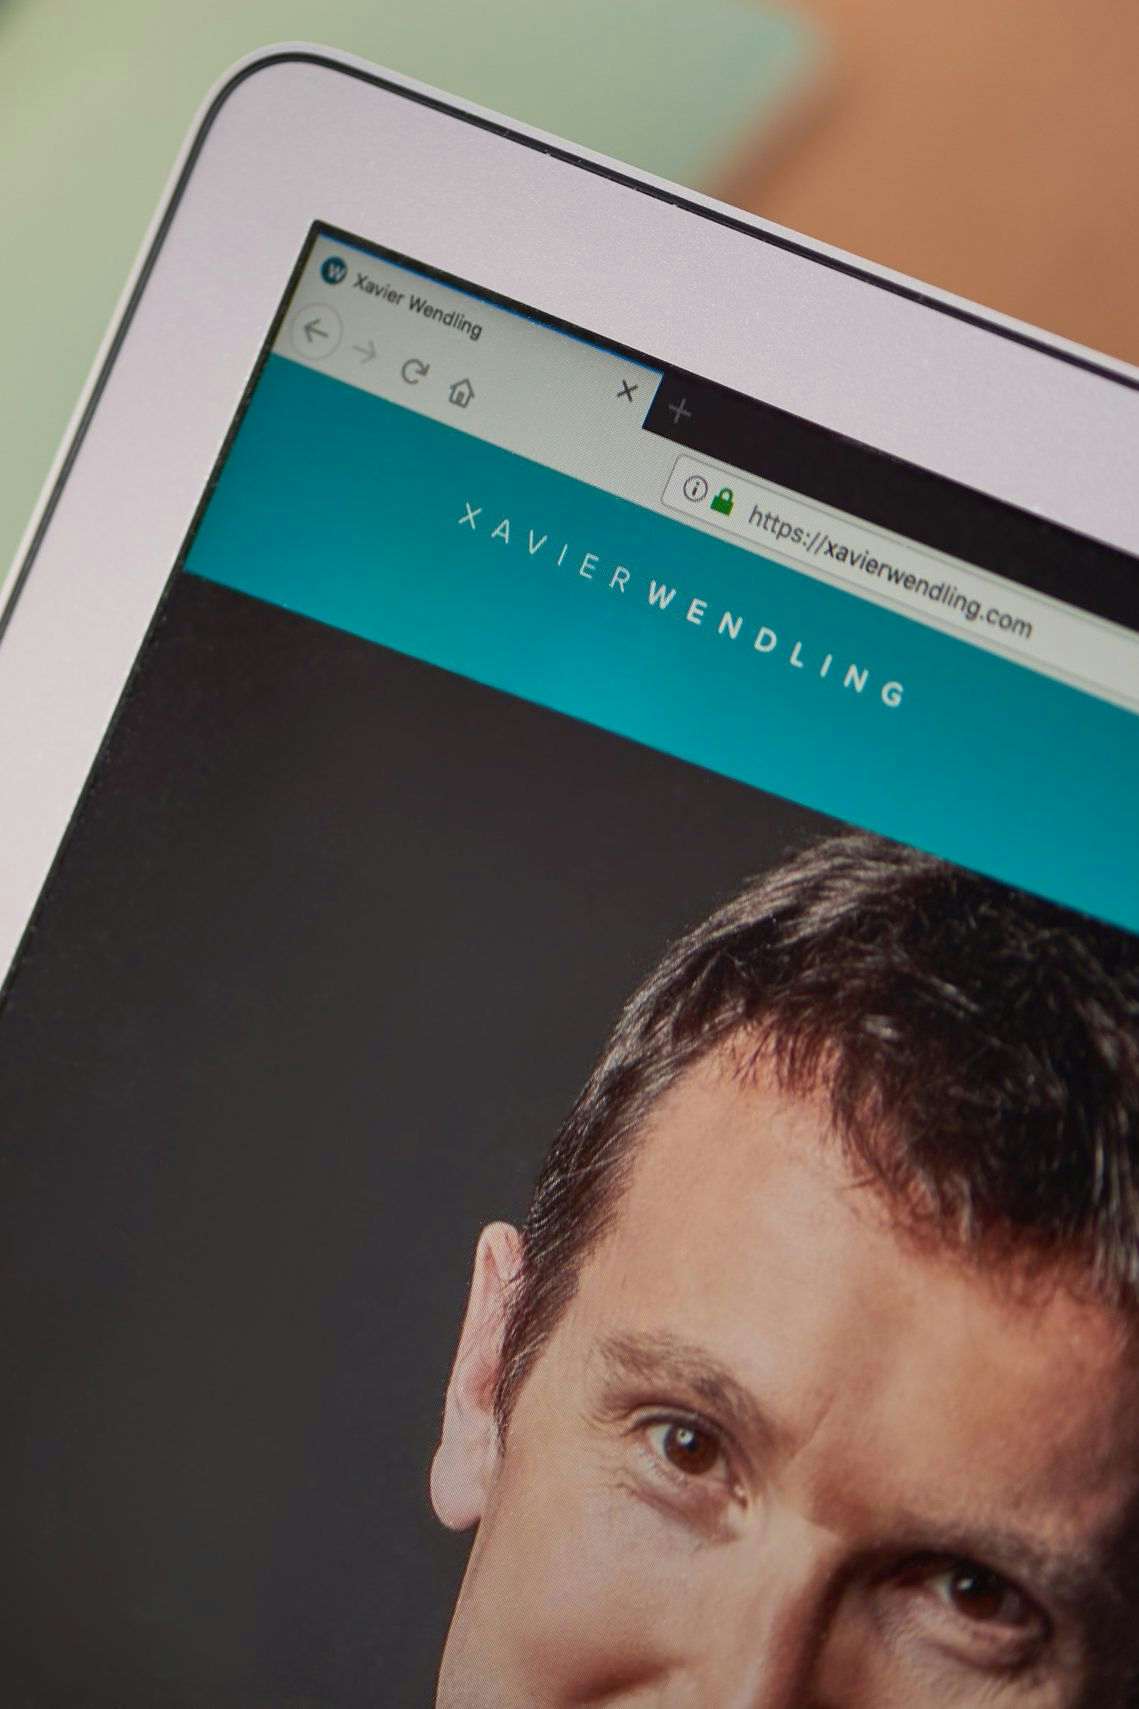 Frontpage of the Xavier Wendling website seen on various screens